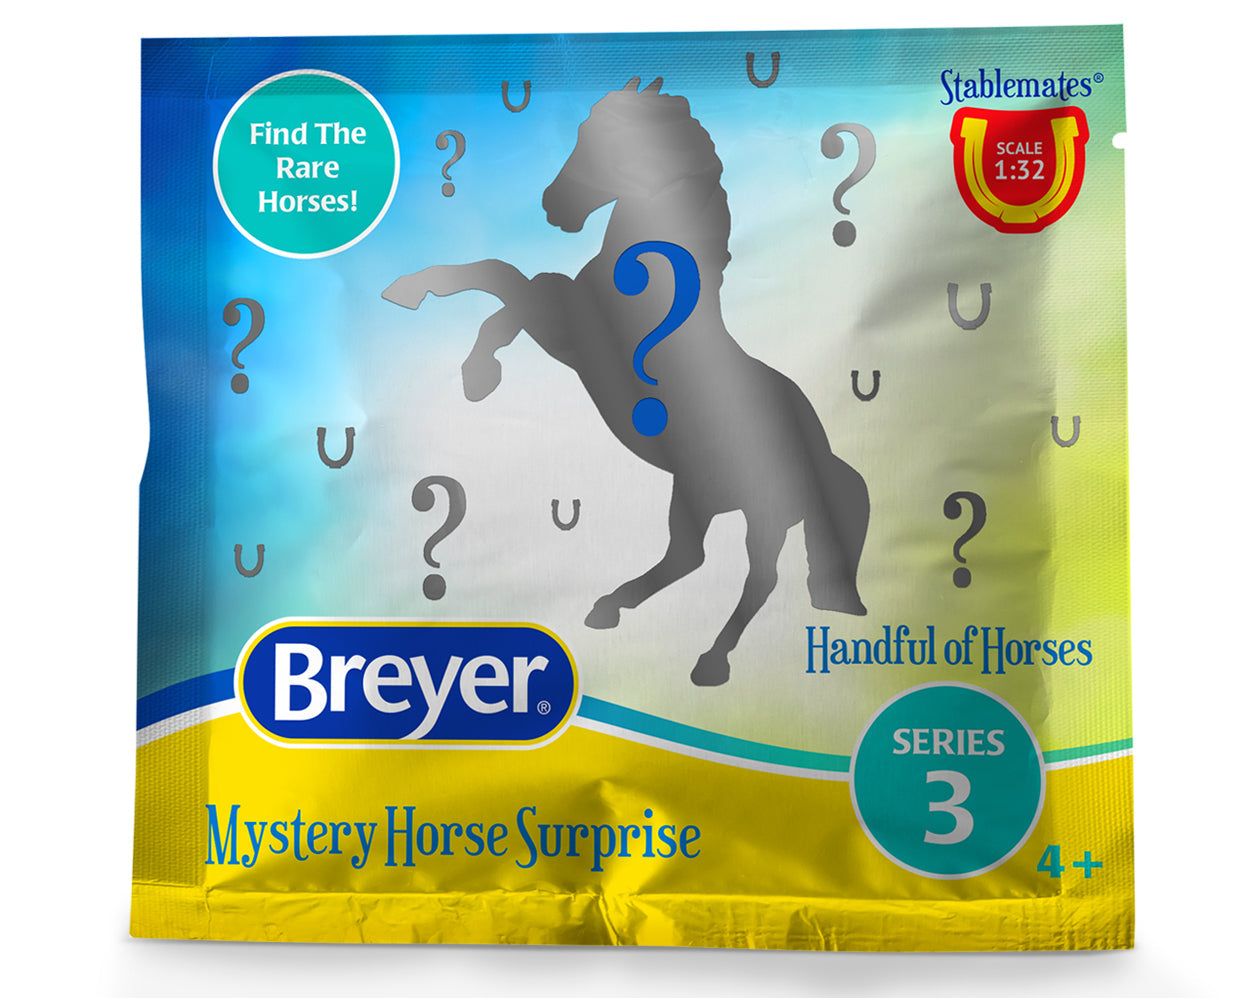 Stablemates Mystery Horse Surprise 3